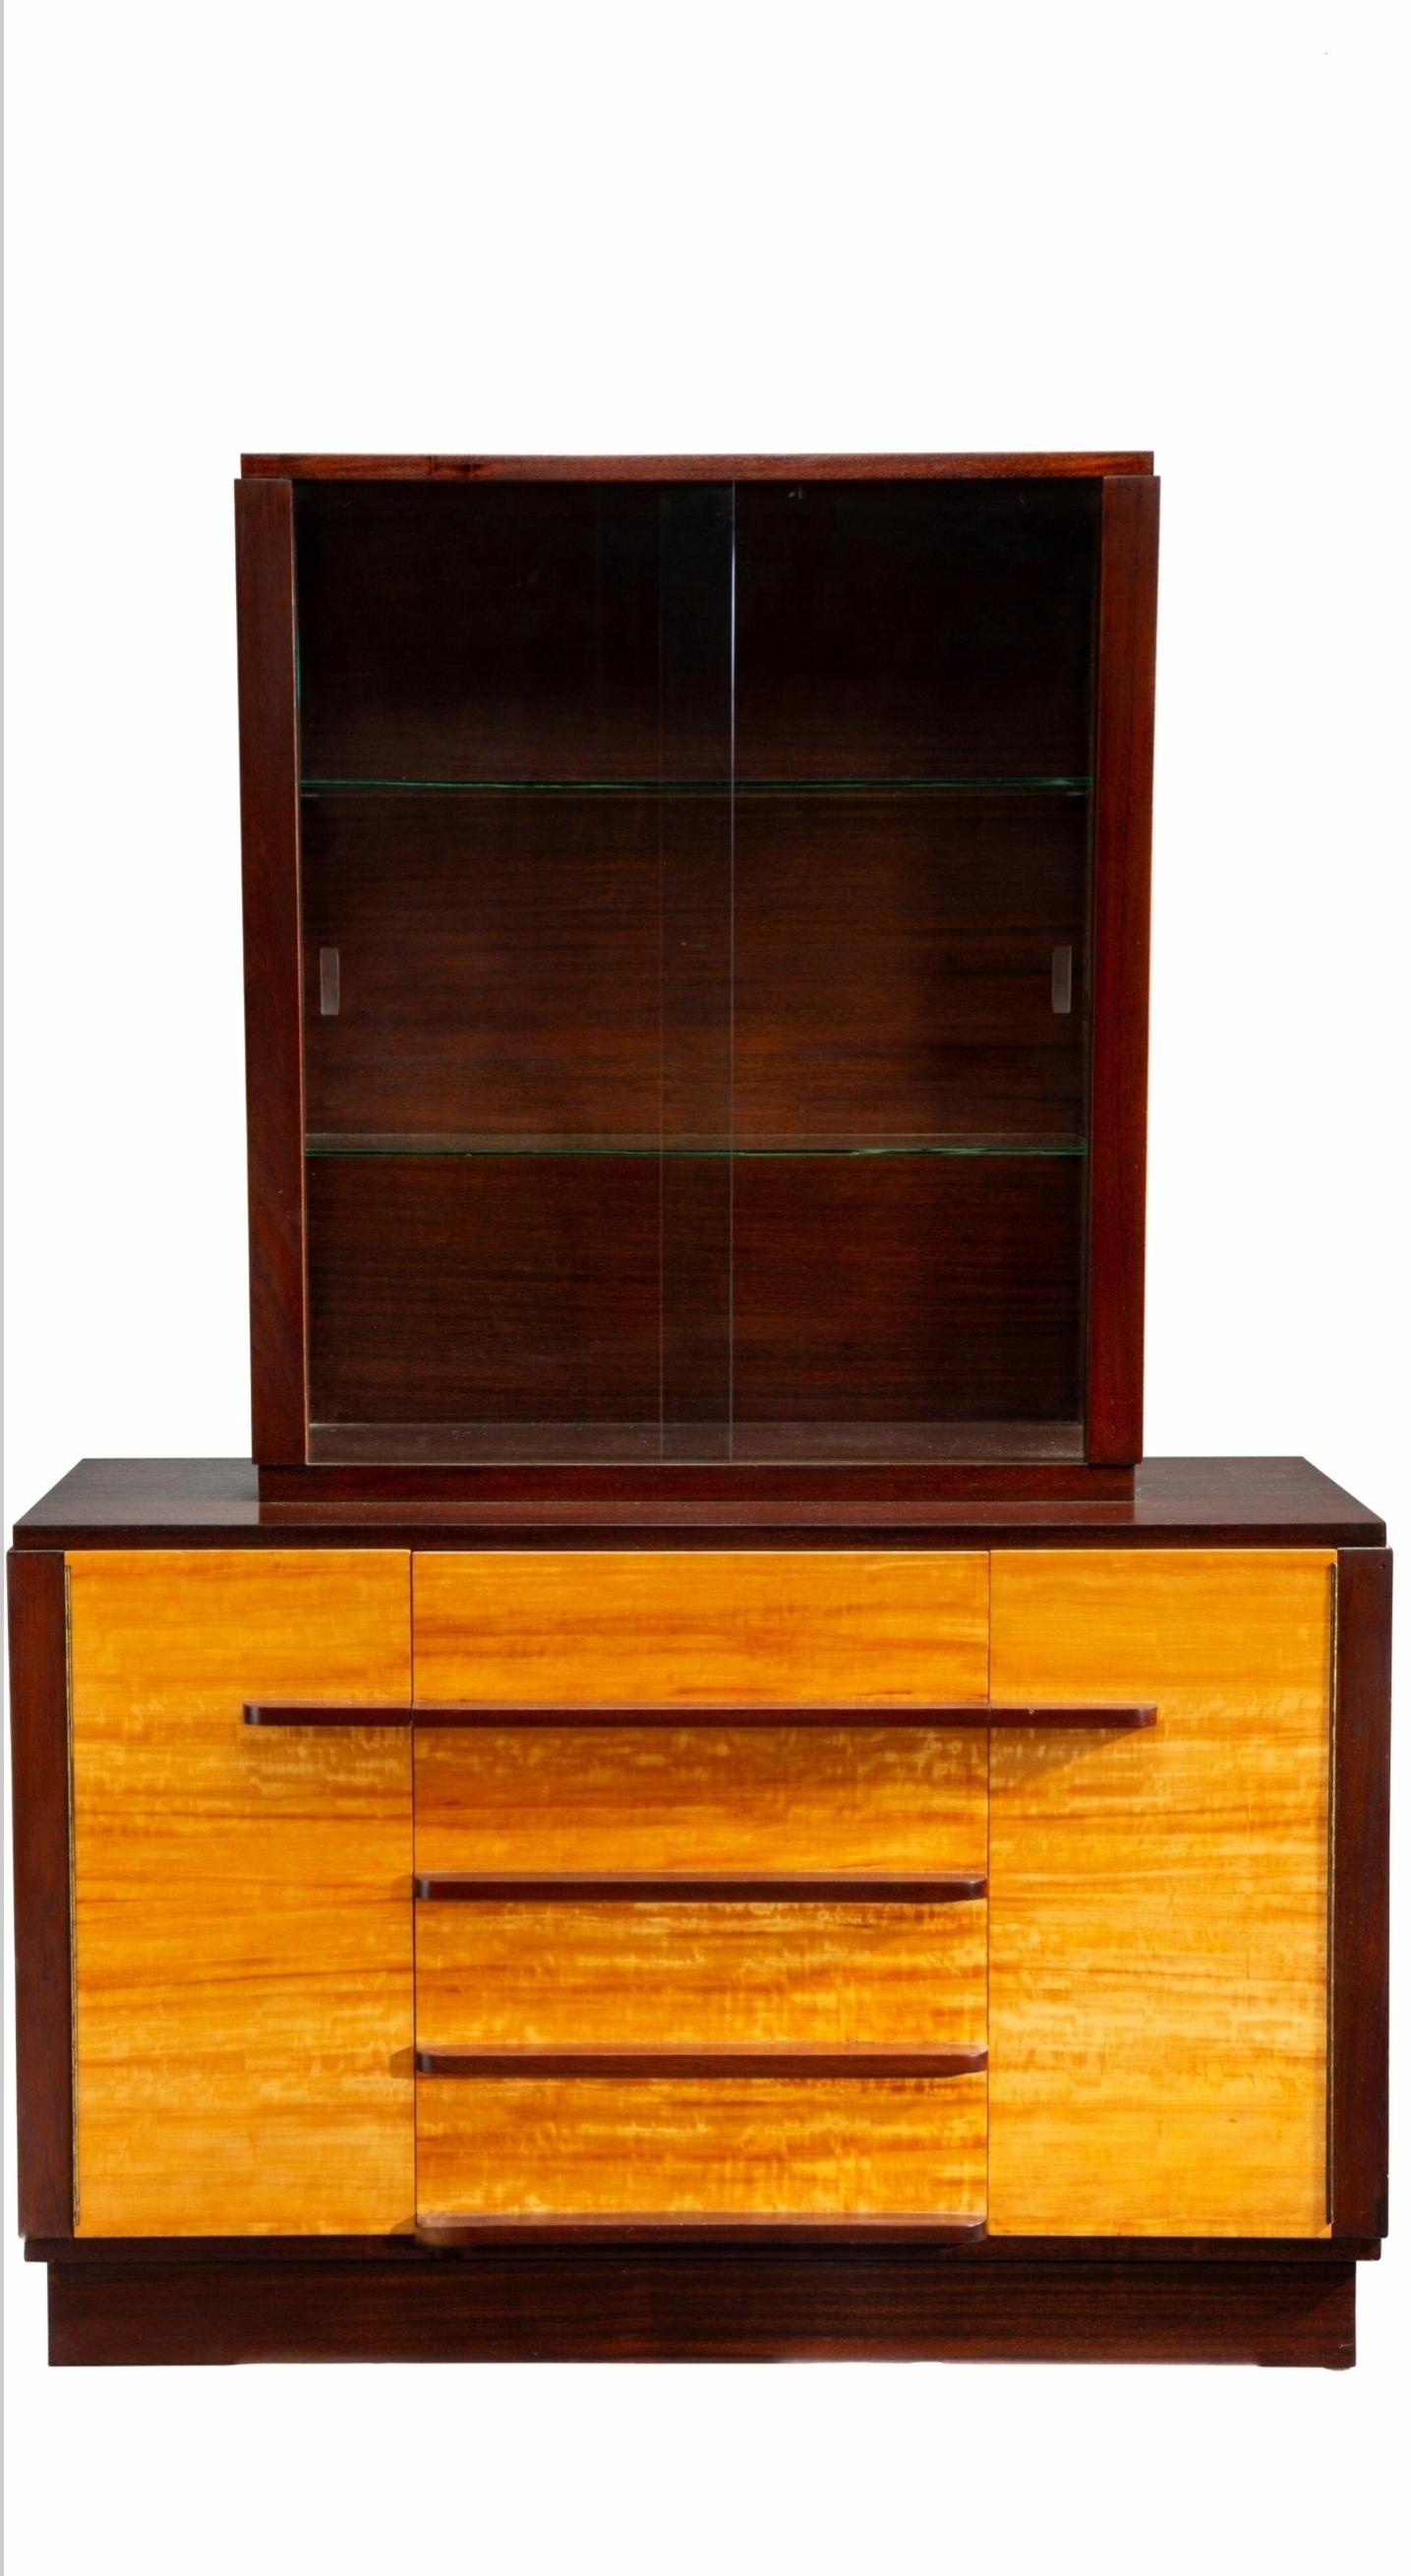 A rare and important Art Deco period Century of Progress Display Cabinet designed by Wolfgang Hoffmann (Austrian, 1900-1969) for Romweber Company, Batesville, Indiana, United States of America. circa 1933-1936

Created for the 1933 Chicago World's